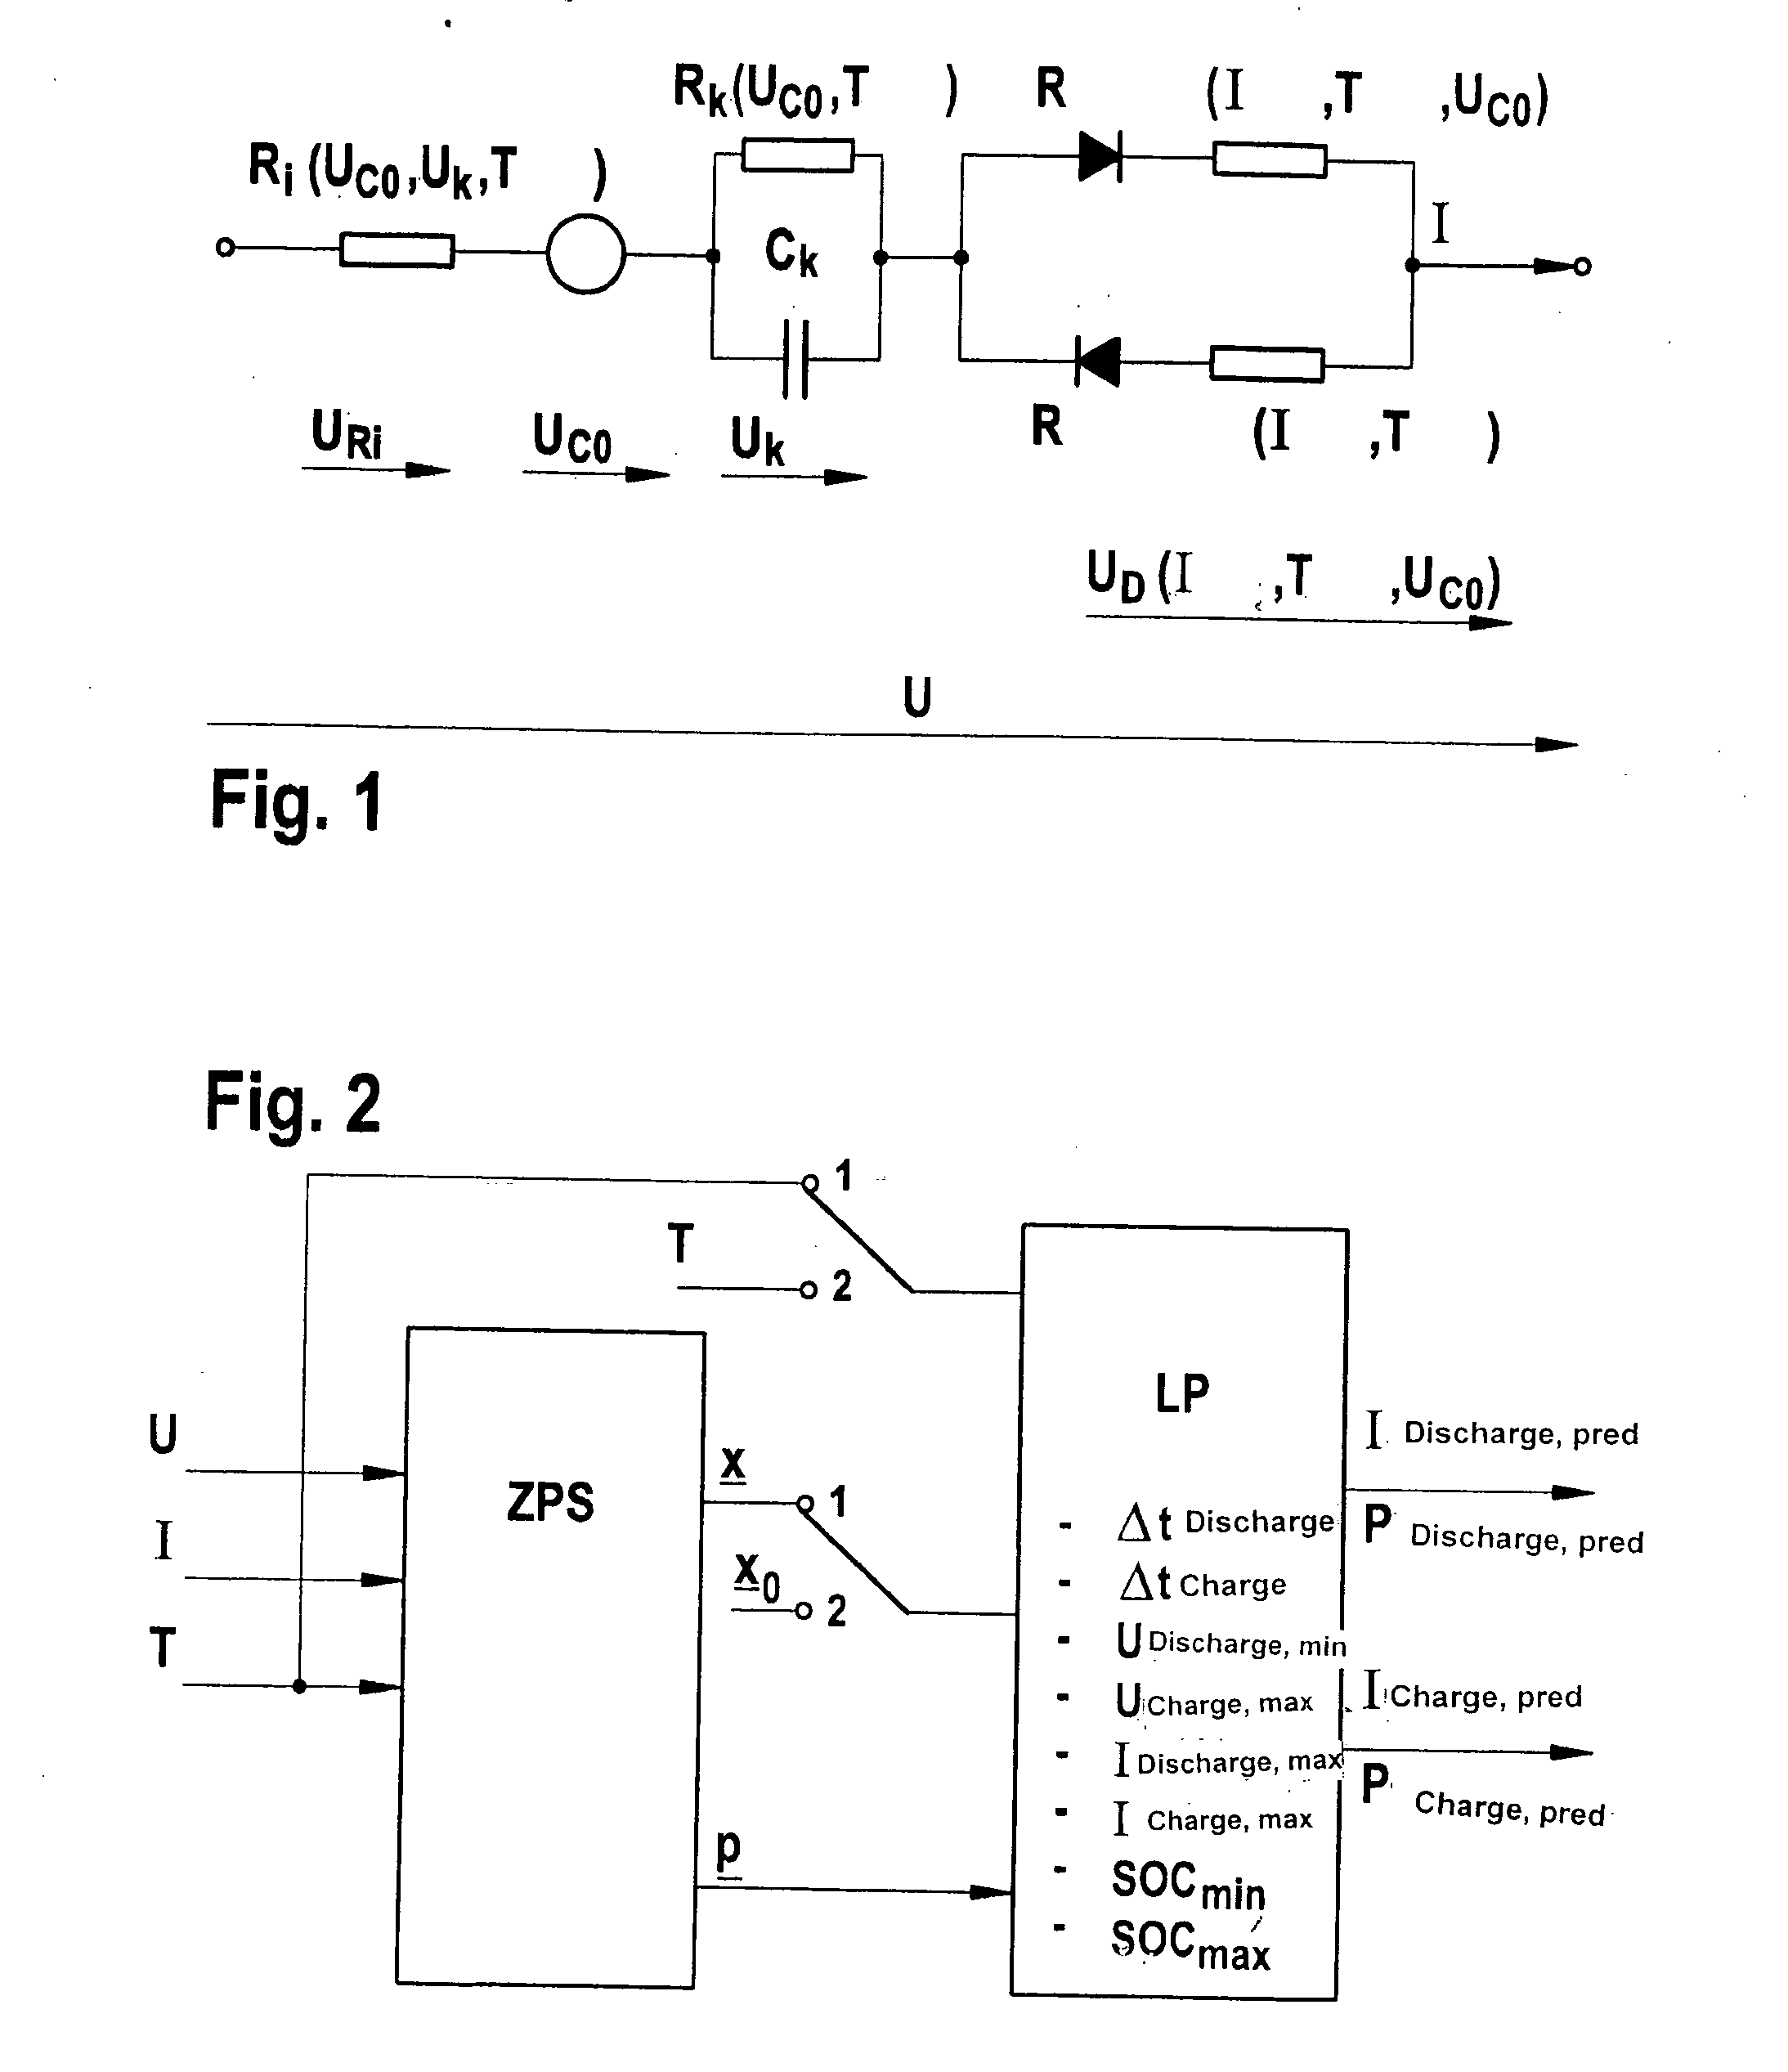 Method for predicting the power capacity of electrical energy stores